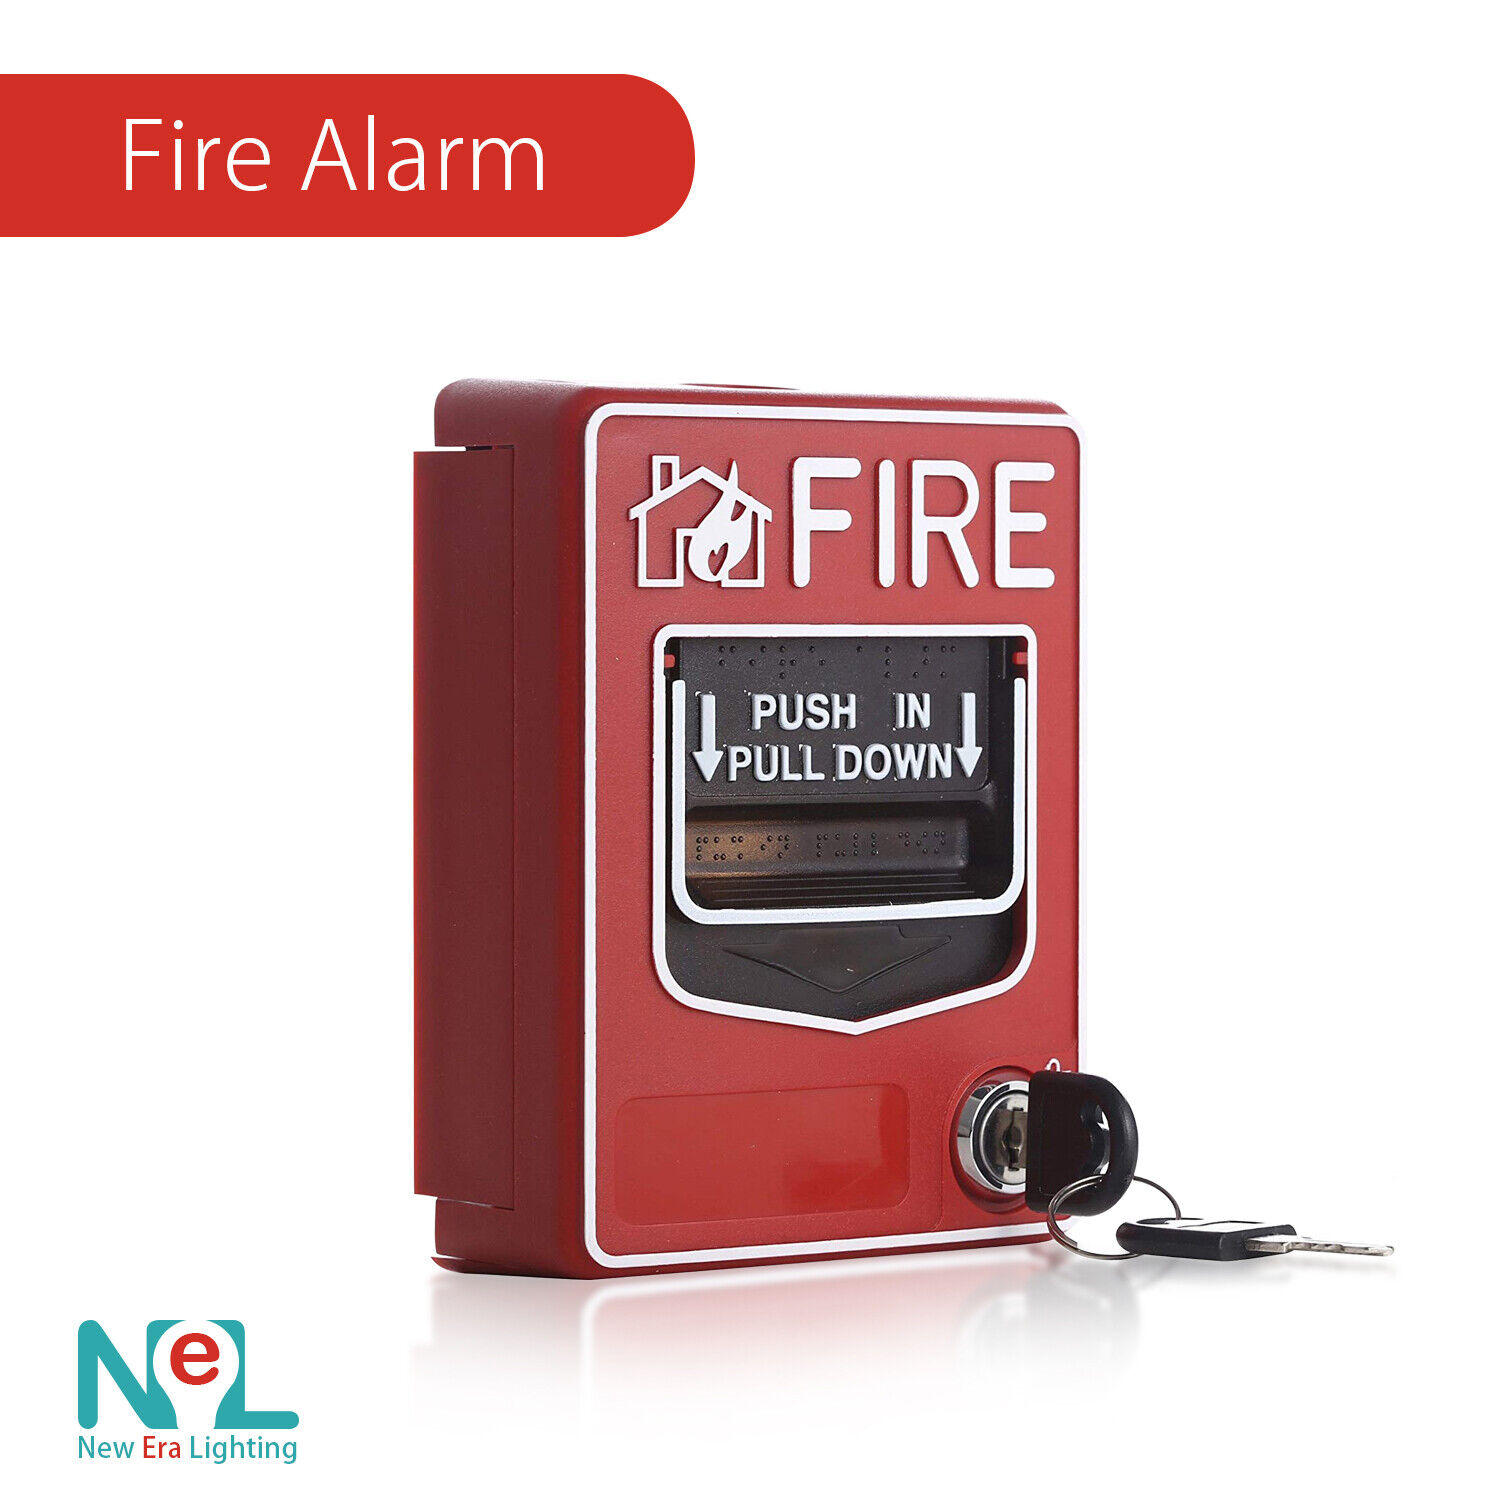 Fire Alarm Dual Action Manual Call Point Wired Emergency Pull Station